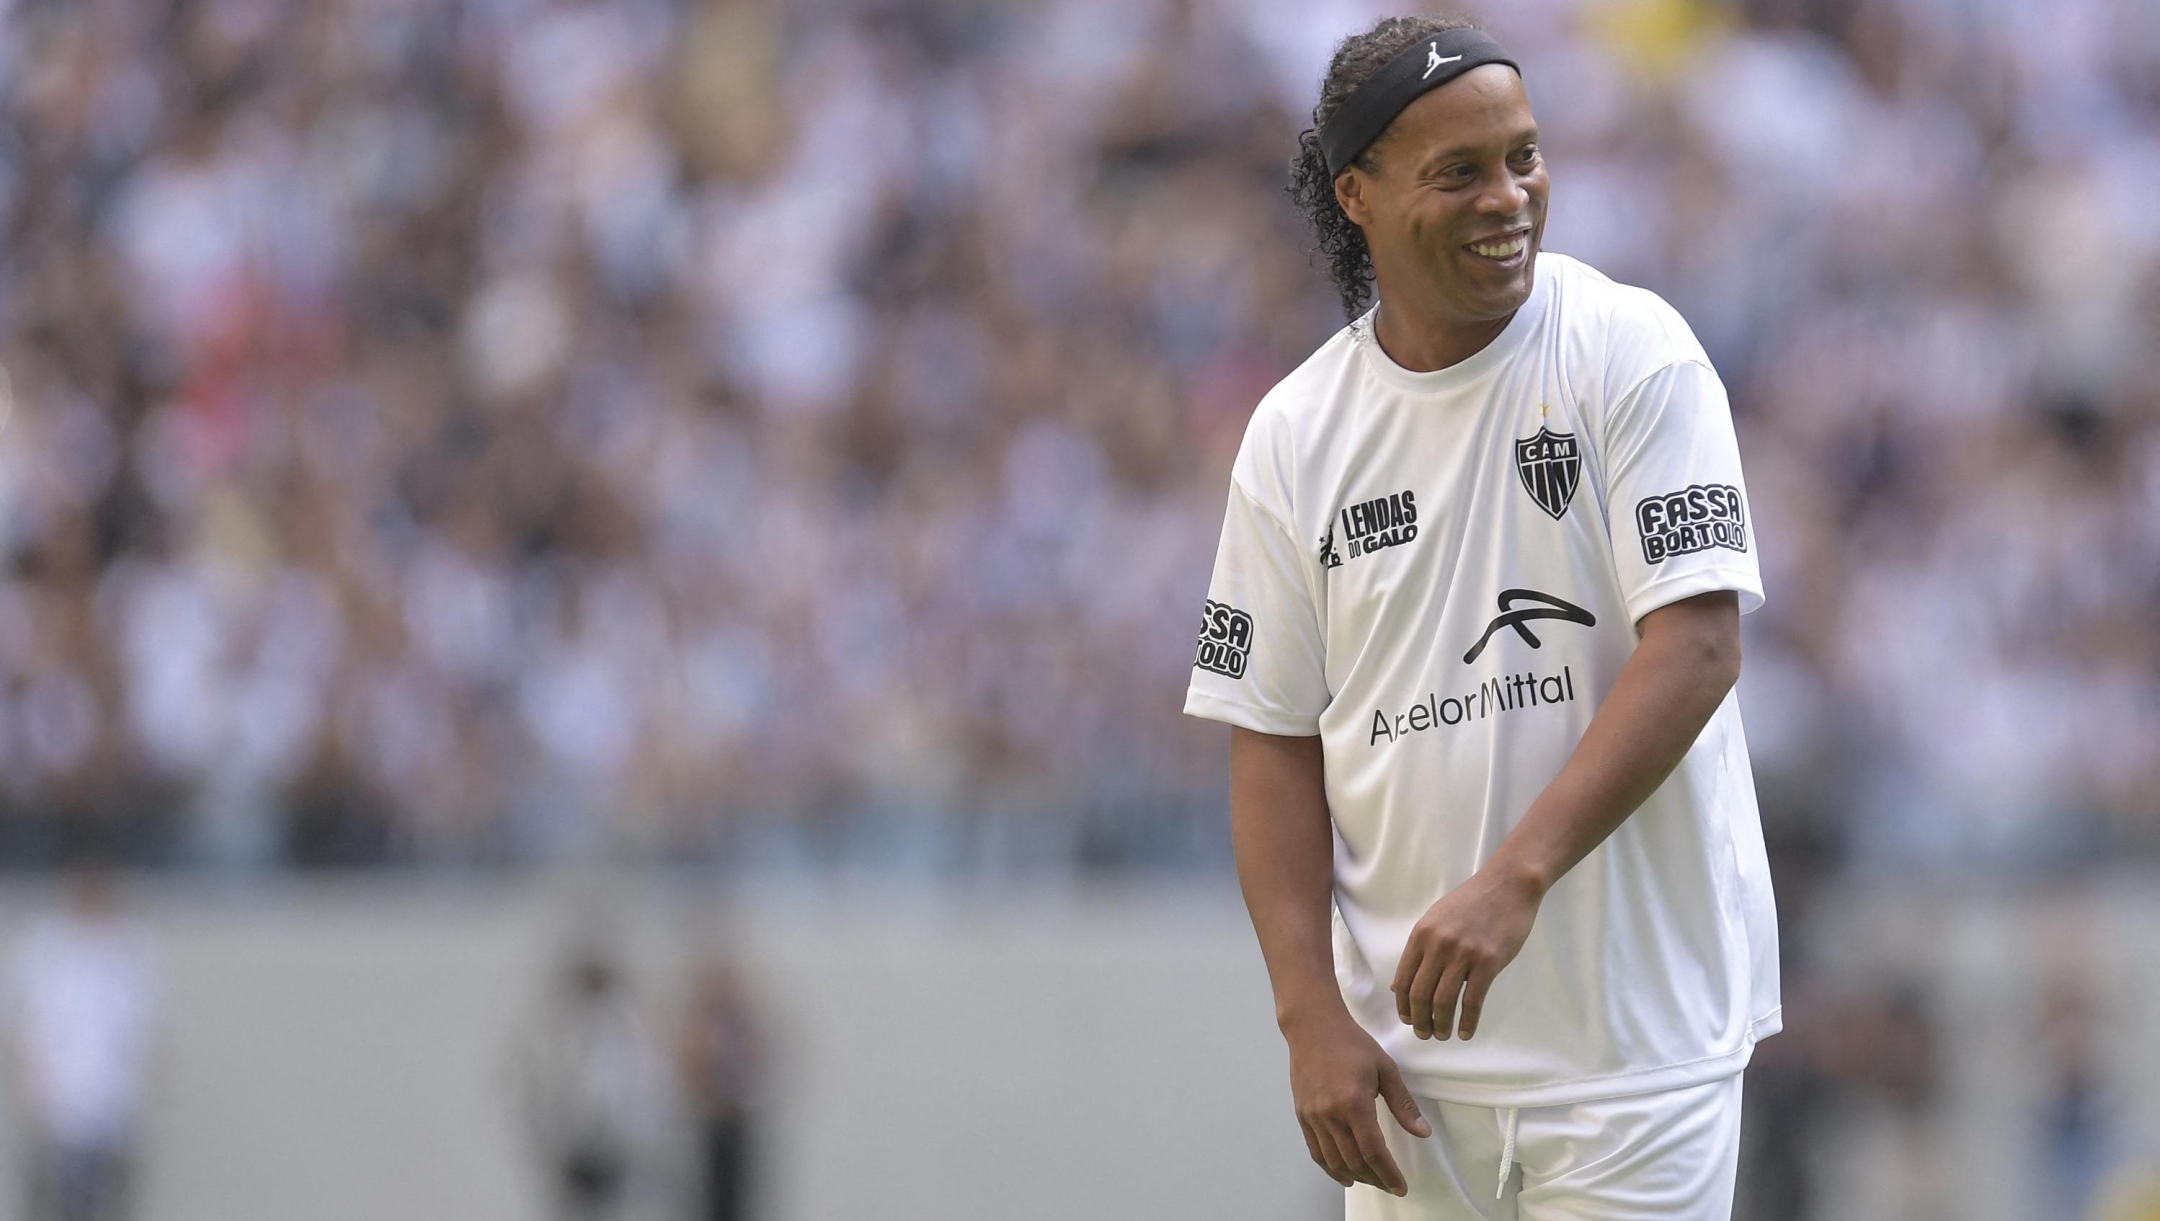 Brazilian ex-football star Ronaldinho Gaucho is pictured during the "Lendas do Galo" match at Arena MRV, the first game at Atletico Mineiro's new stadium in Belo Horizonte, Minas Gerais state, Brazil, on July 16, 2023. (Photo by Douglas Magno / AFP)